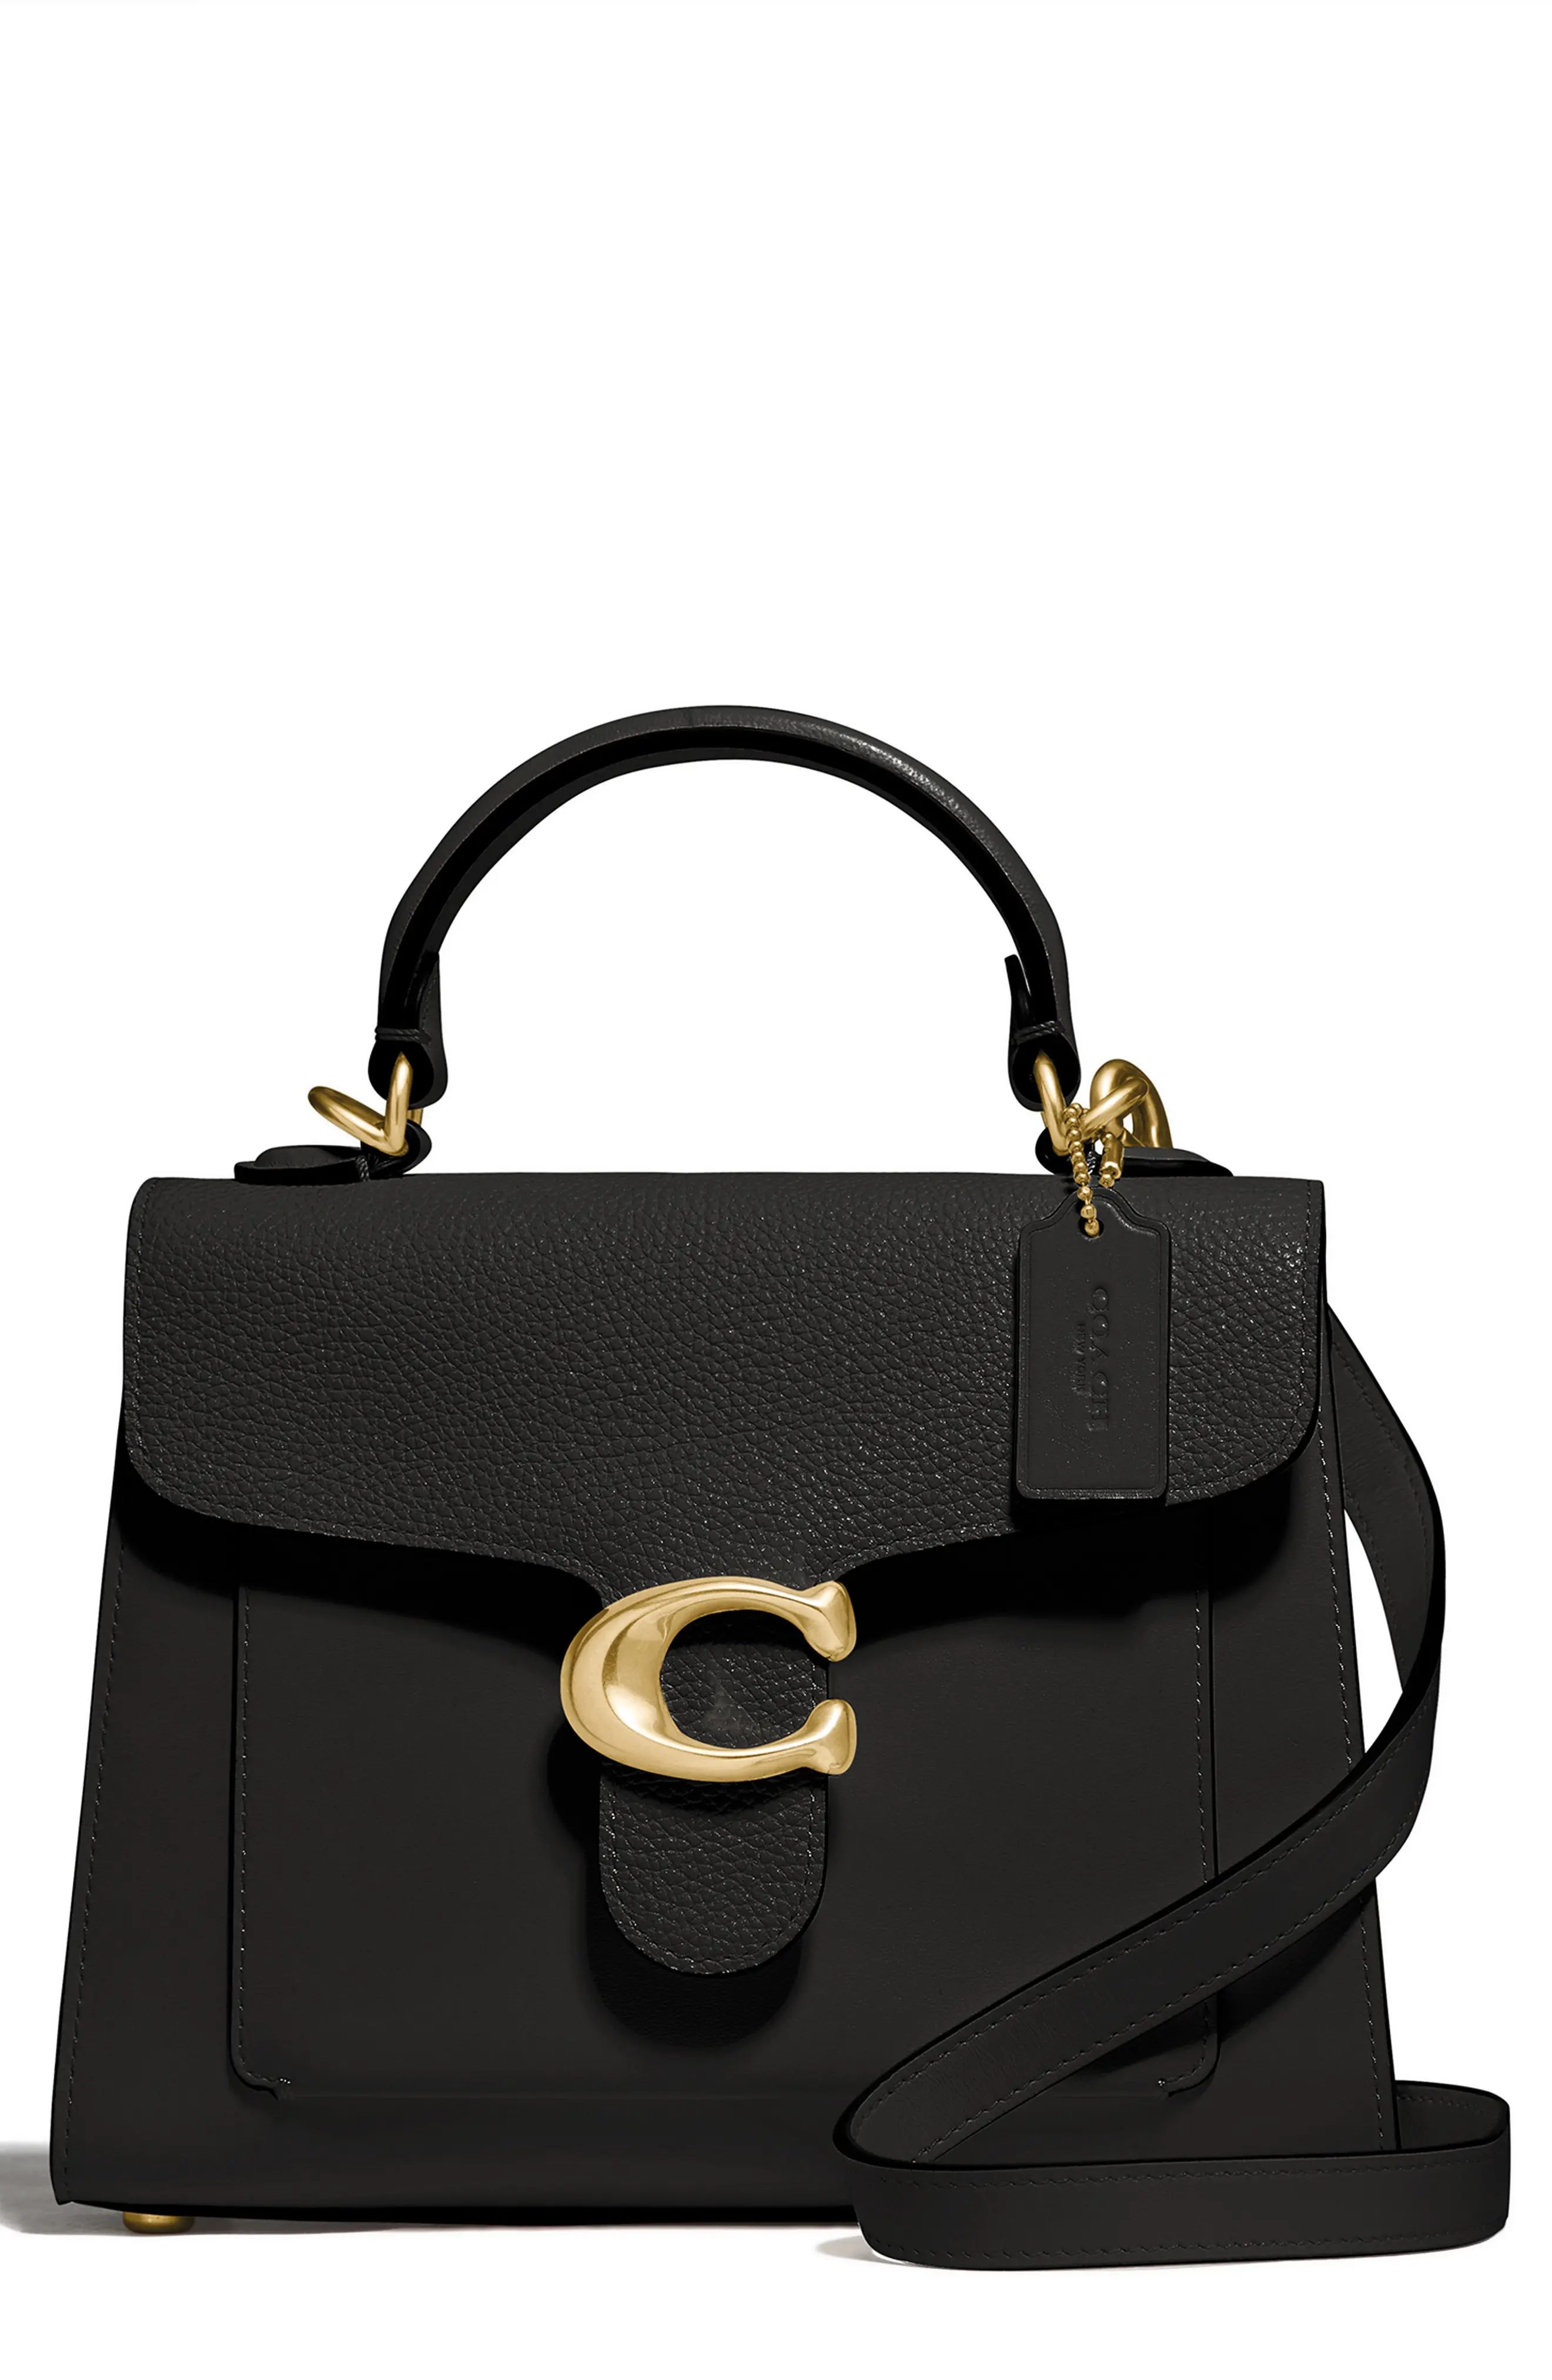 Coach Tabby Mixed Leather Top Handle Bag - Black | Nordstrom